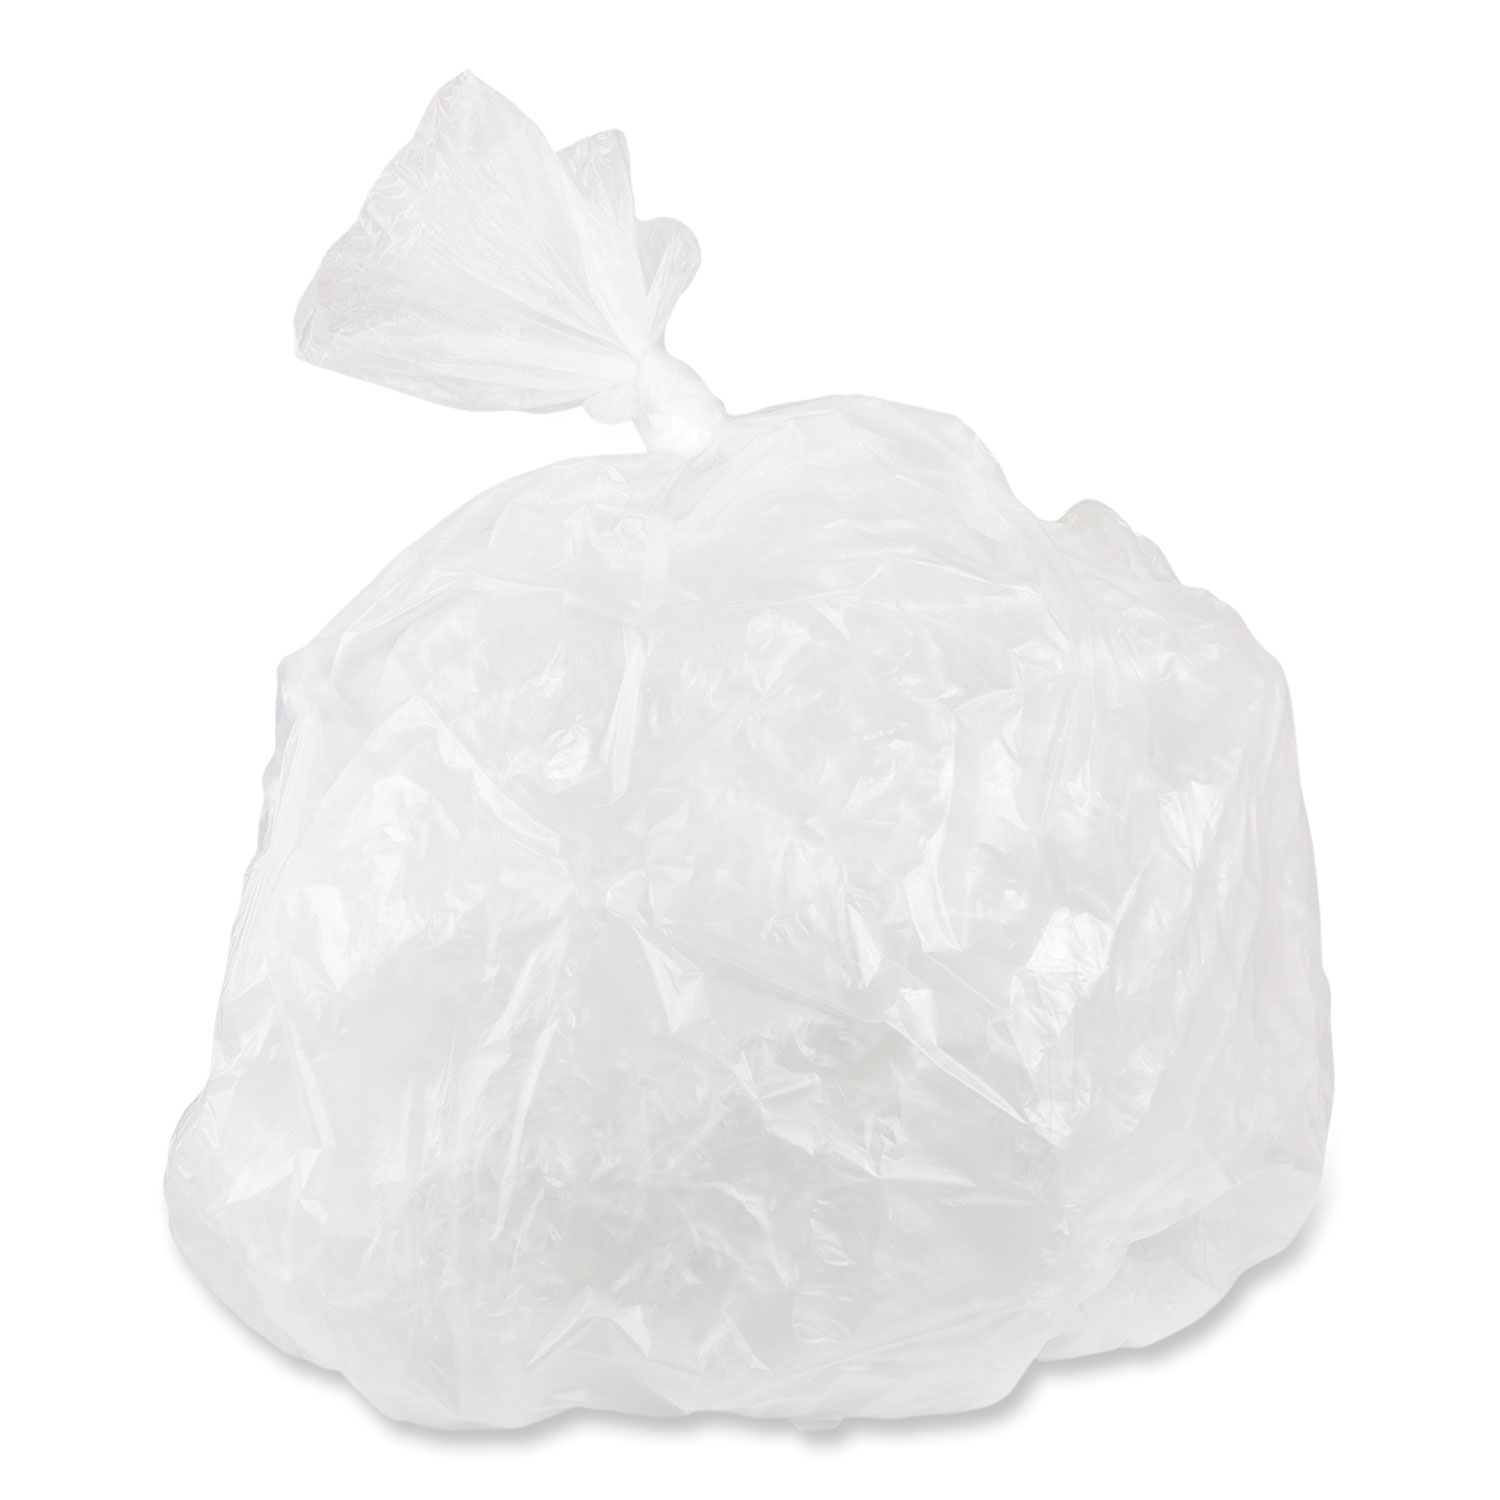 Bagtron Can Liners CL2424NA8 24 x 24 7-10 gallon qty1000, 50bags/roll,  20rolls/ctn Natural